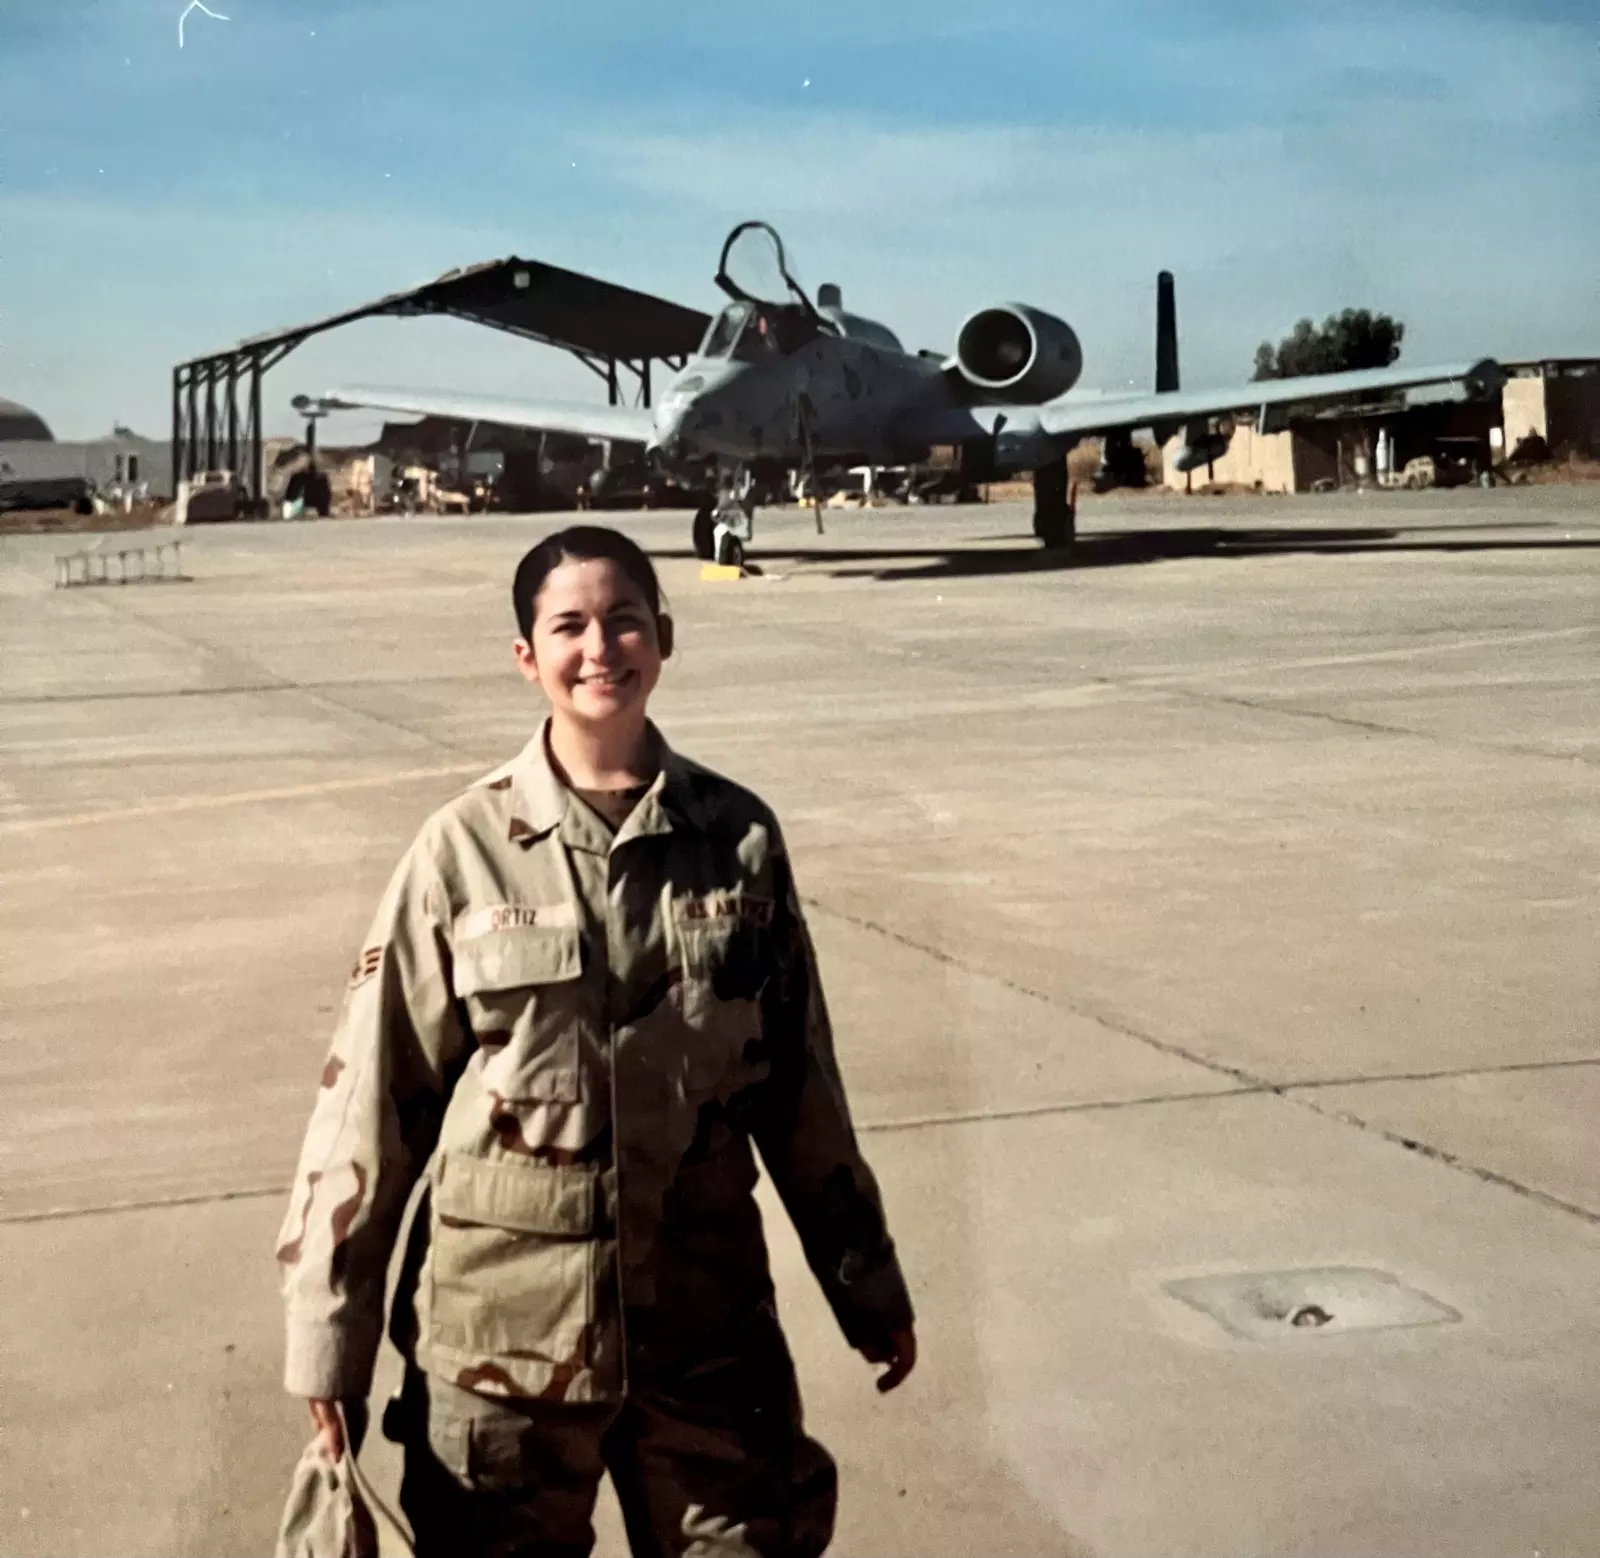 A photo of Jennifer Vincent in front of a military aircraft during her time in the service.